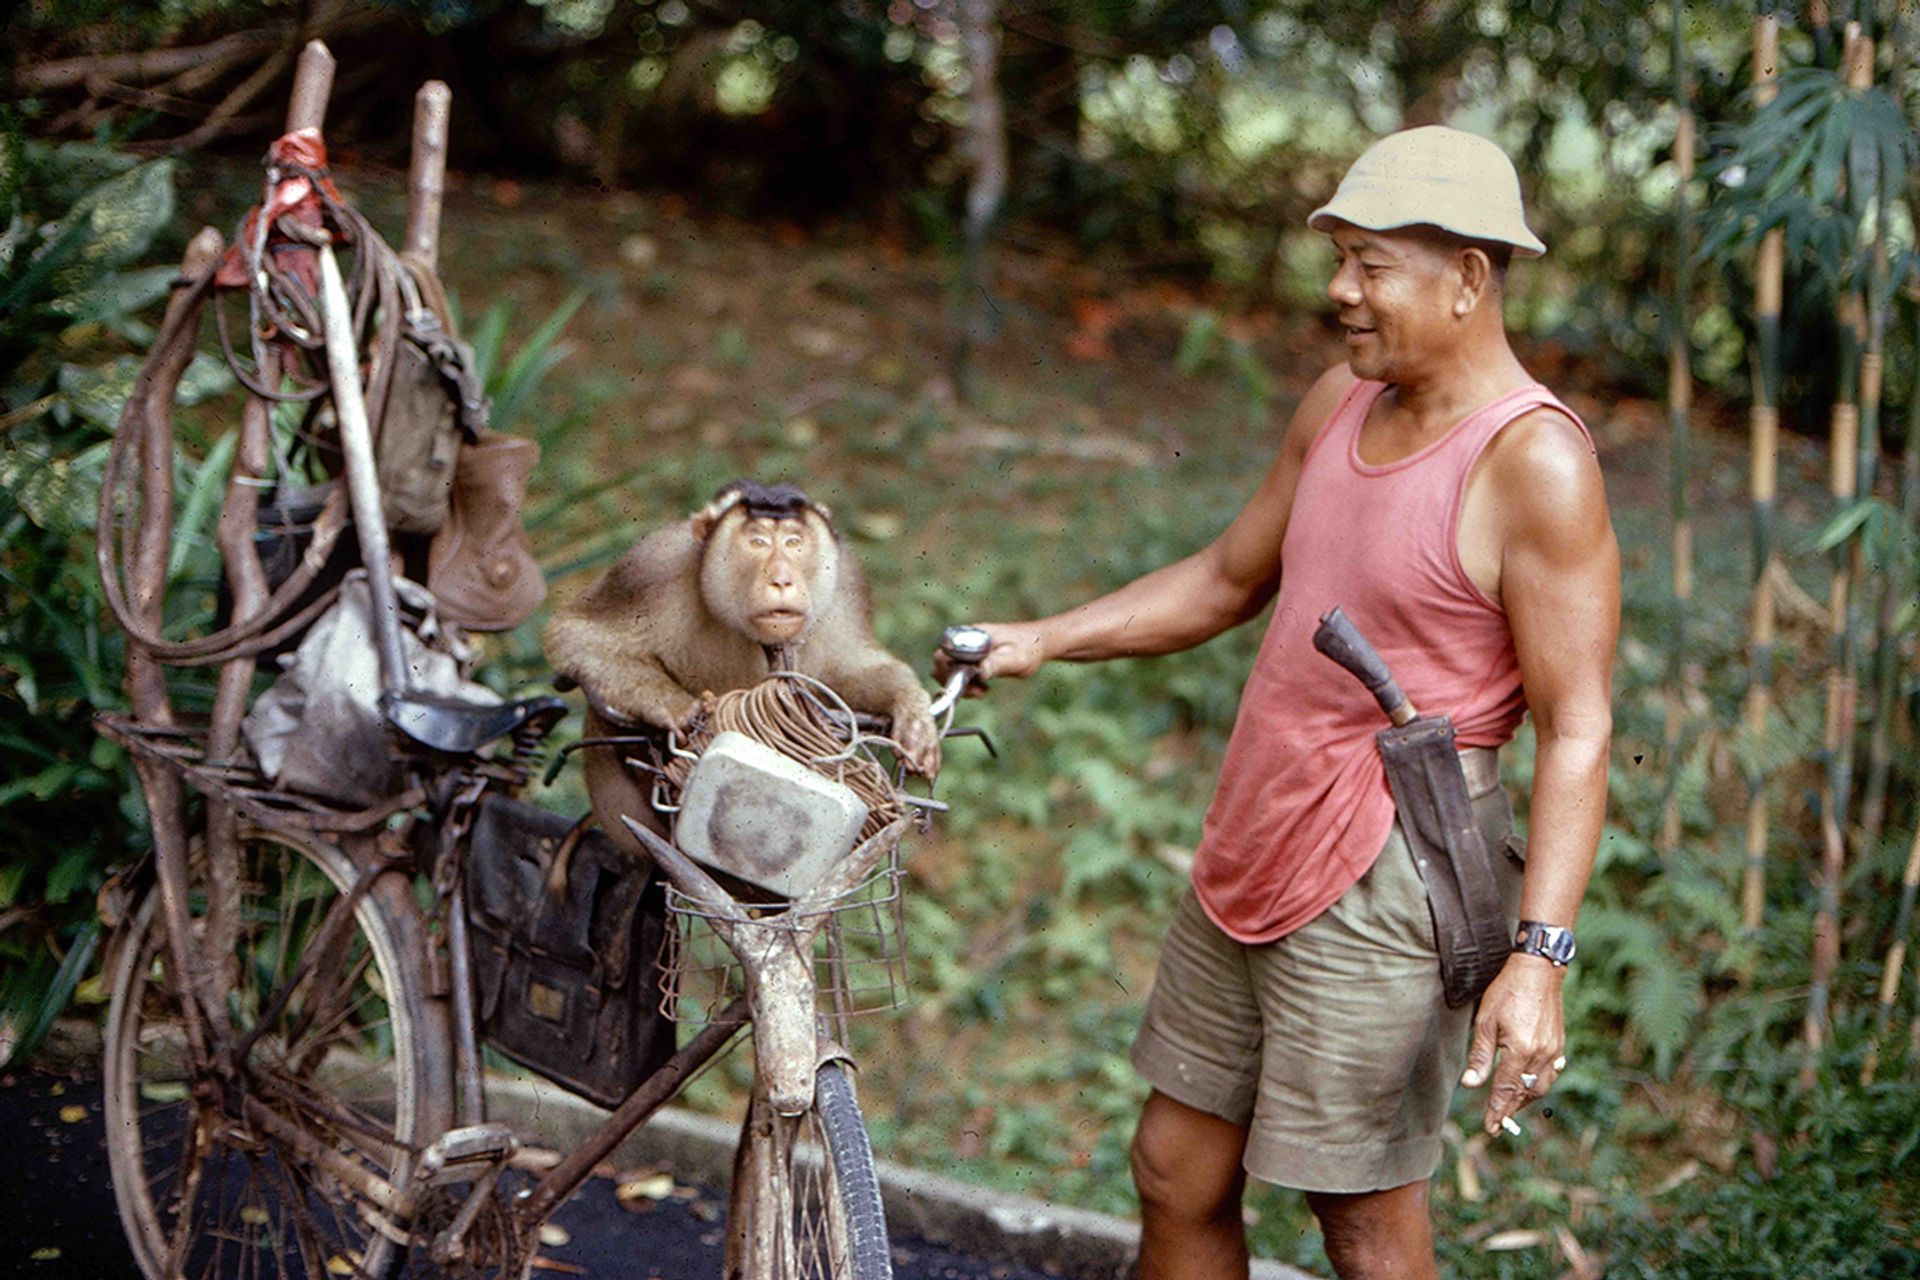 This retired prison warden with his coconut-picking monkey was a familiar sight along Bukit Timah Road in the 1970s. His monkey was trained to climb up coconut trees and pluck only the ripe coconuts.